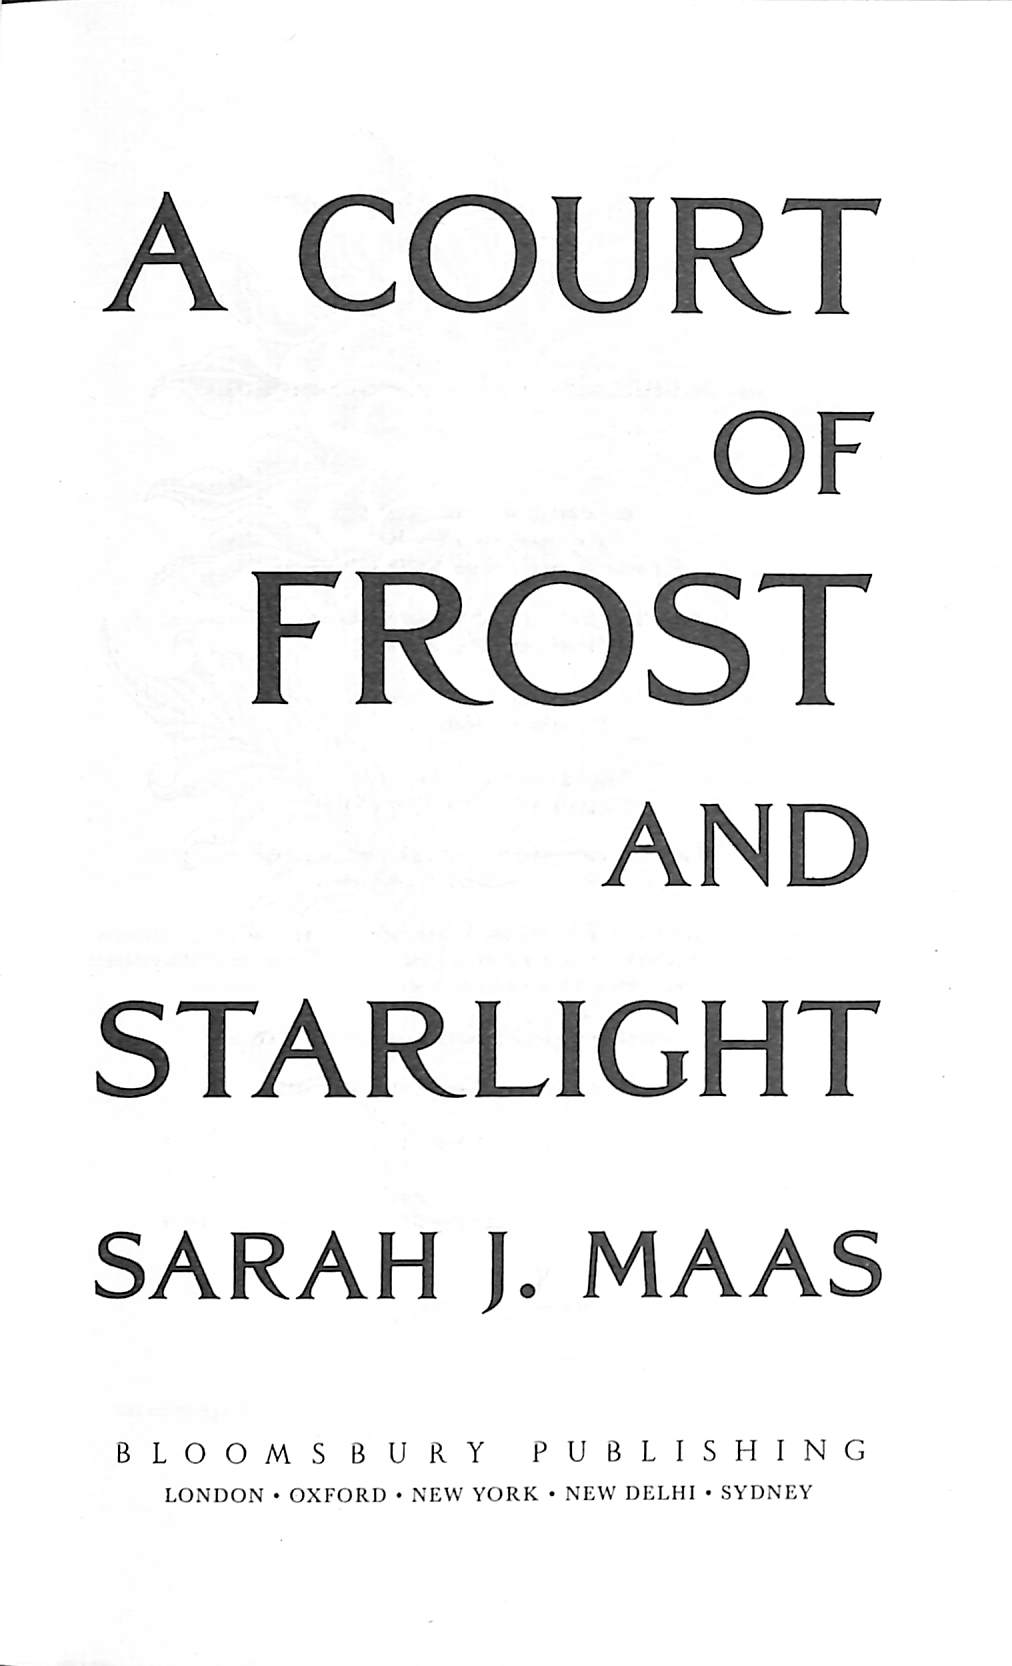 A court of frost and starlight by Sarah J. Maas